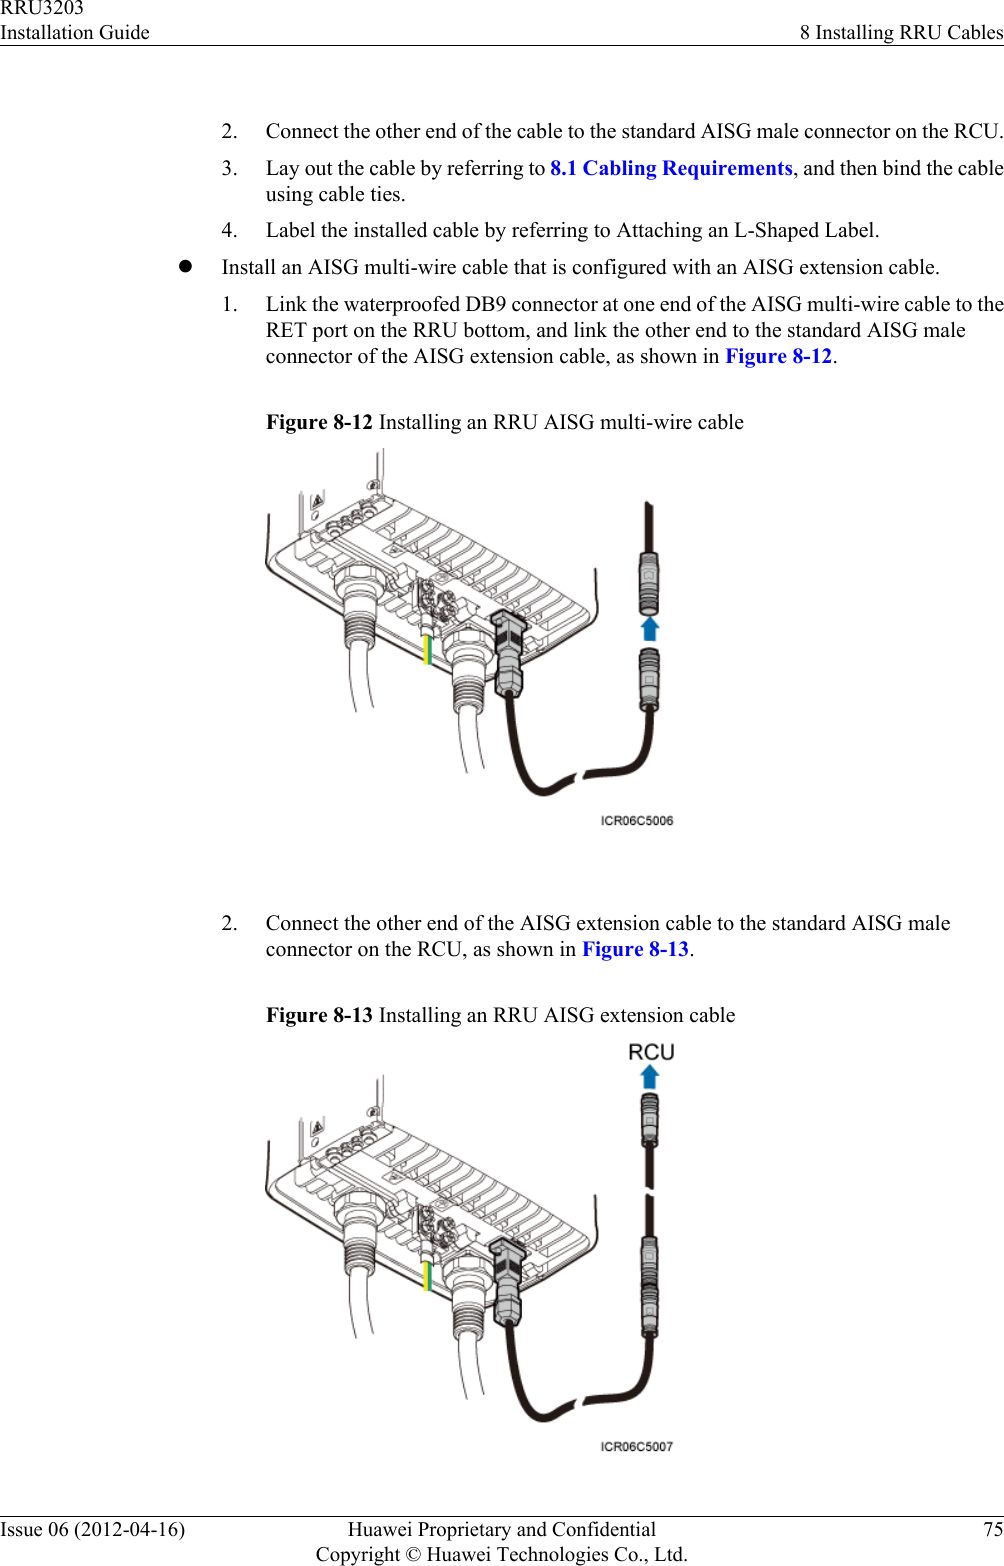  2. Connect the other end of the cable to the standard AISG male connector on the RCU.3. Lay out the cable by referring to 8.1 Cabling Requirements, and then bind the cableusing cable ties.4. Label the installed cable by referring to Attaching an L-Shaped Label.lInstall an AISG multi-wire cable that is configured with an AISG extension cable.1. Link the waterproofed DB9 connector at one end of the AISG multi-wire cable to theRET port on the RRU bottom, and link the other end to the standard AISG maleconnector of the AISG extension cable, as shown in Figure 8-12.Figure 8-12 Installing an RRU AISG multi-wire cable 2. Connect the other end of the AISG extension cable to the standard AISG maleconnector on the RCU, as shown in Figure 8-13.Figure 8-13 Installing an RRU AISG extension cableRRU3203Installation Guide 8 Installing RRU CablesIssue 06 (2012-04-16) Huawei Proprietary and ConfidentialCopyright © Huawei Technologies Co., Ltd.75